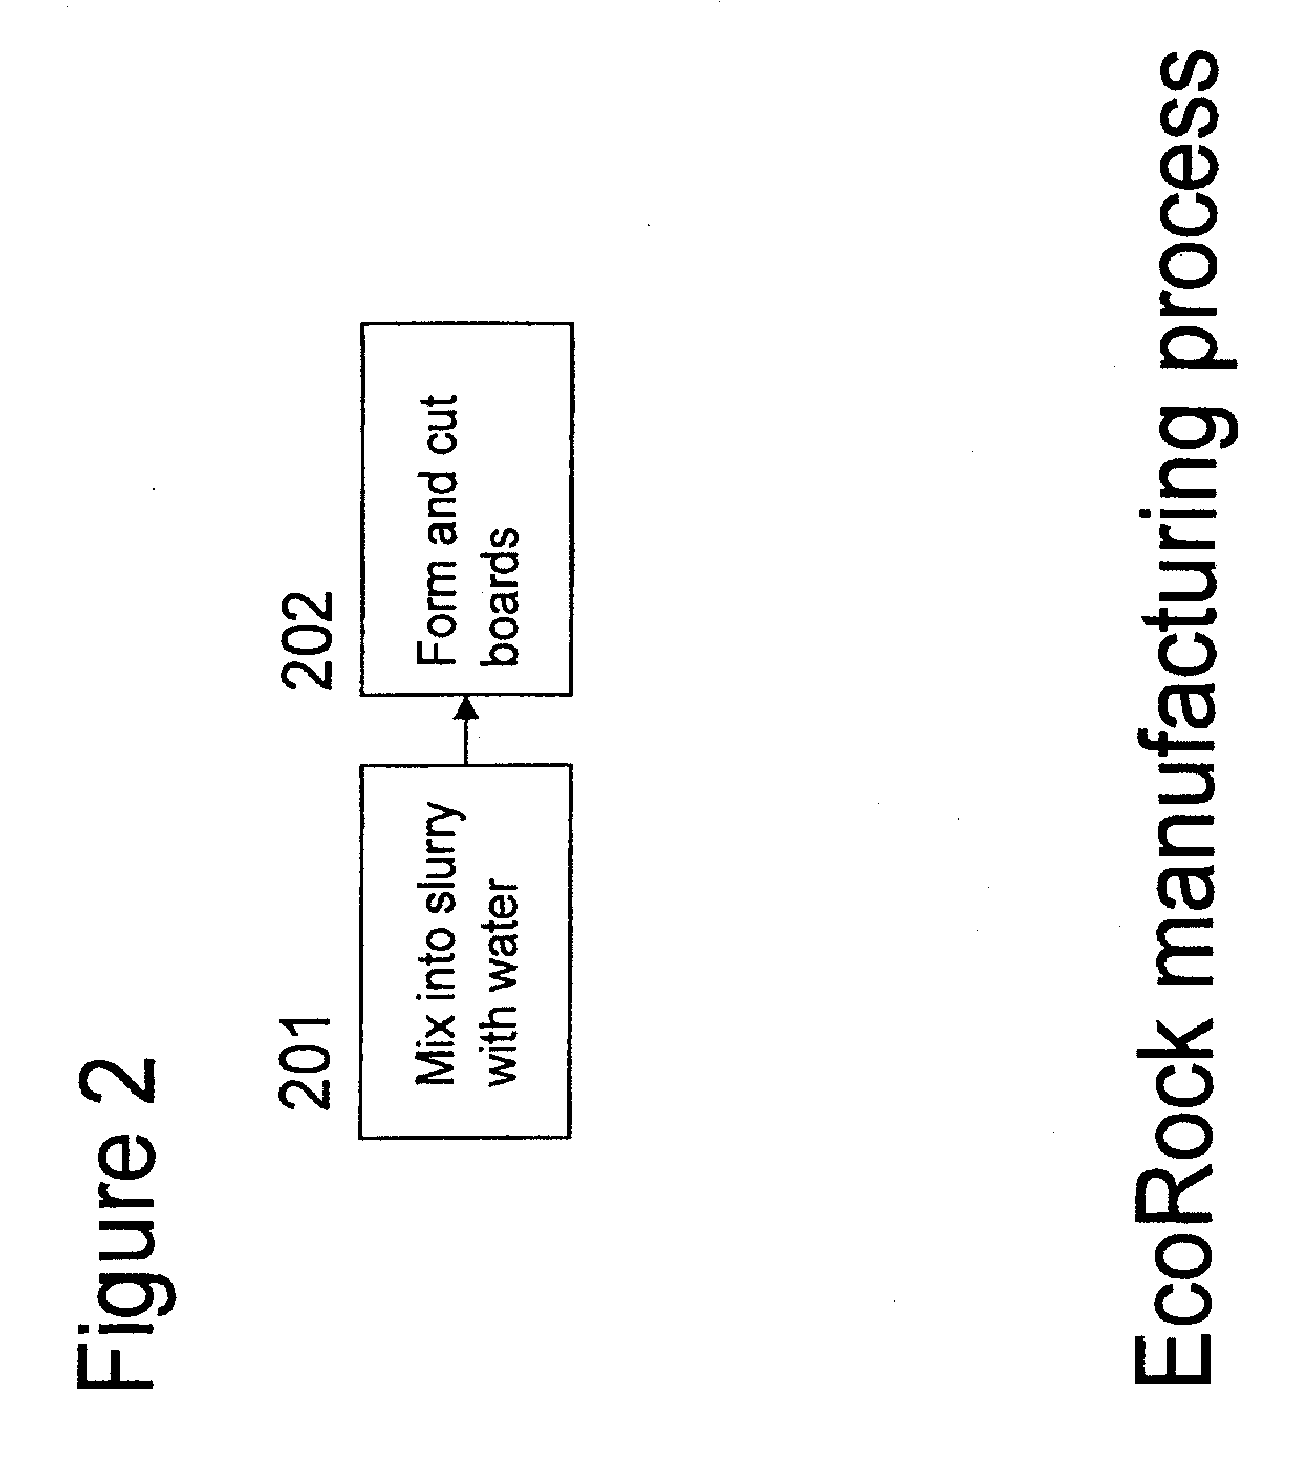 Low Embodied Energy Wallboards and Methods of Making Same